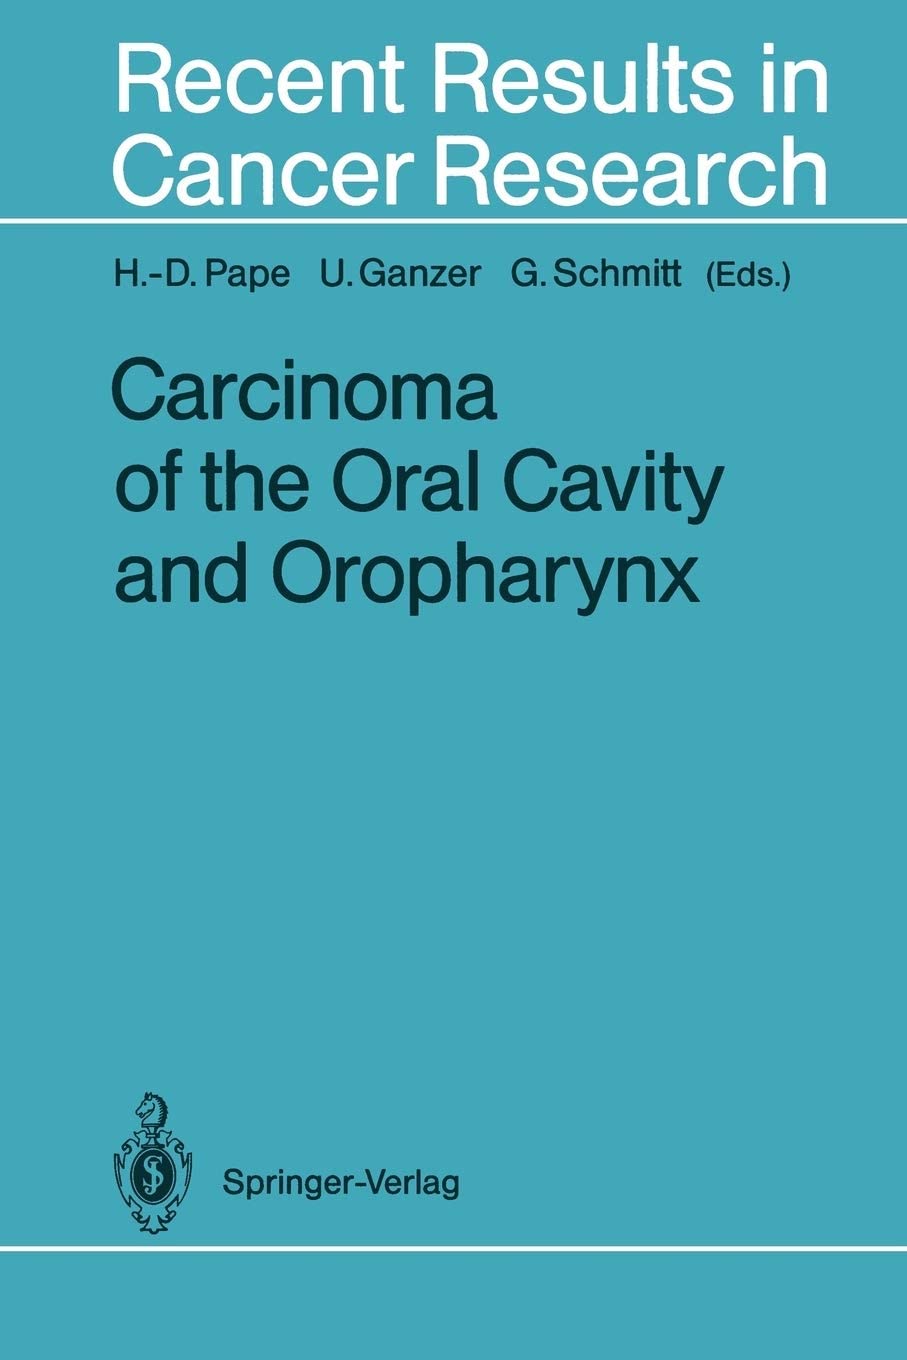 Carcinoma of the Oral Cavity and Oropharynx (Recent Results in Cancer Research, 134)